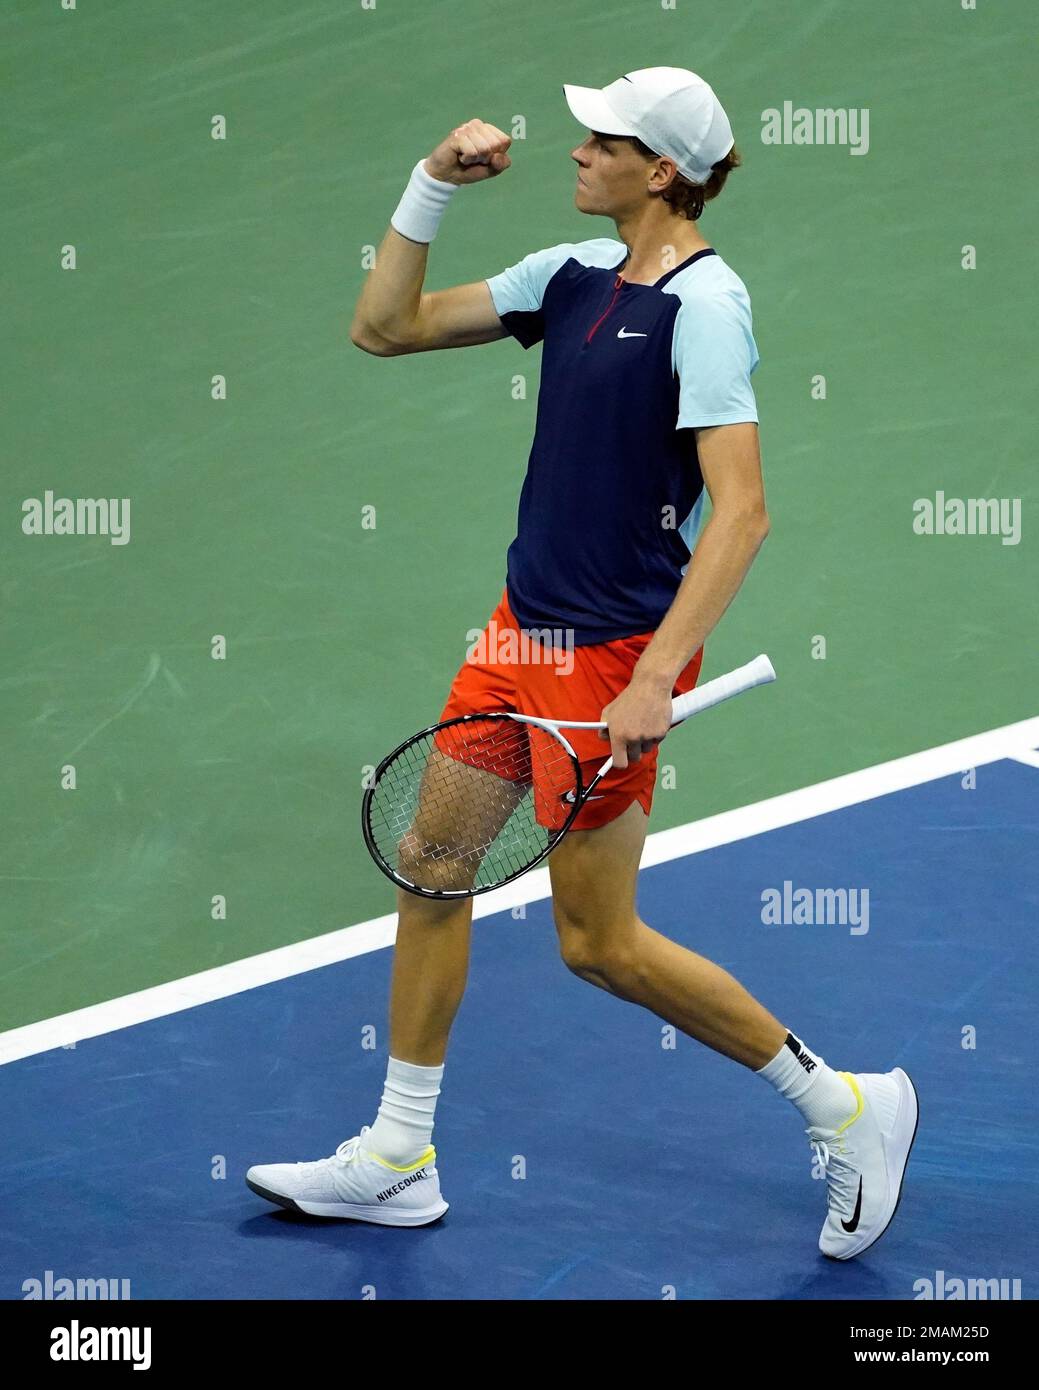 Jannik Sinner, of Italy, celebrates after winning a point against Carlos Alcaraz, of Spain, during the quarterfinals of the U.S. Open tennis championships, Wednesday, Sept